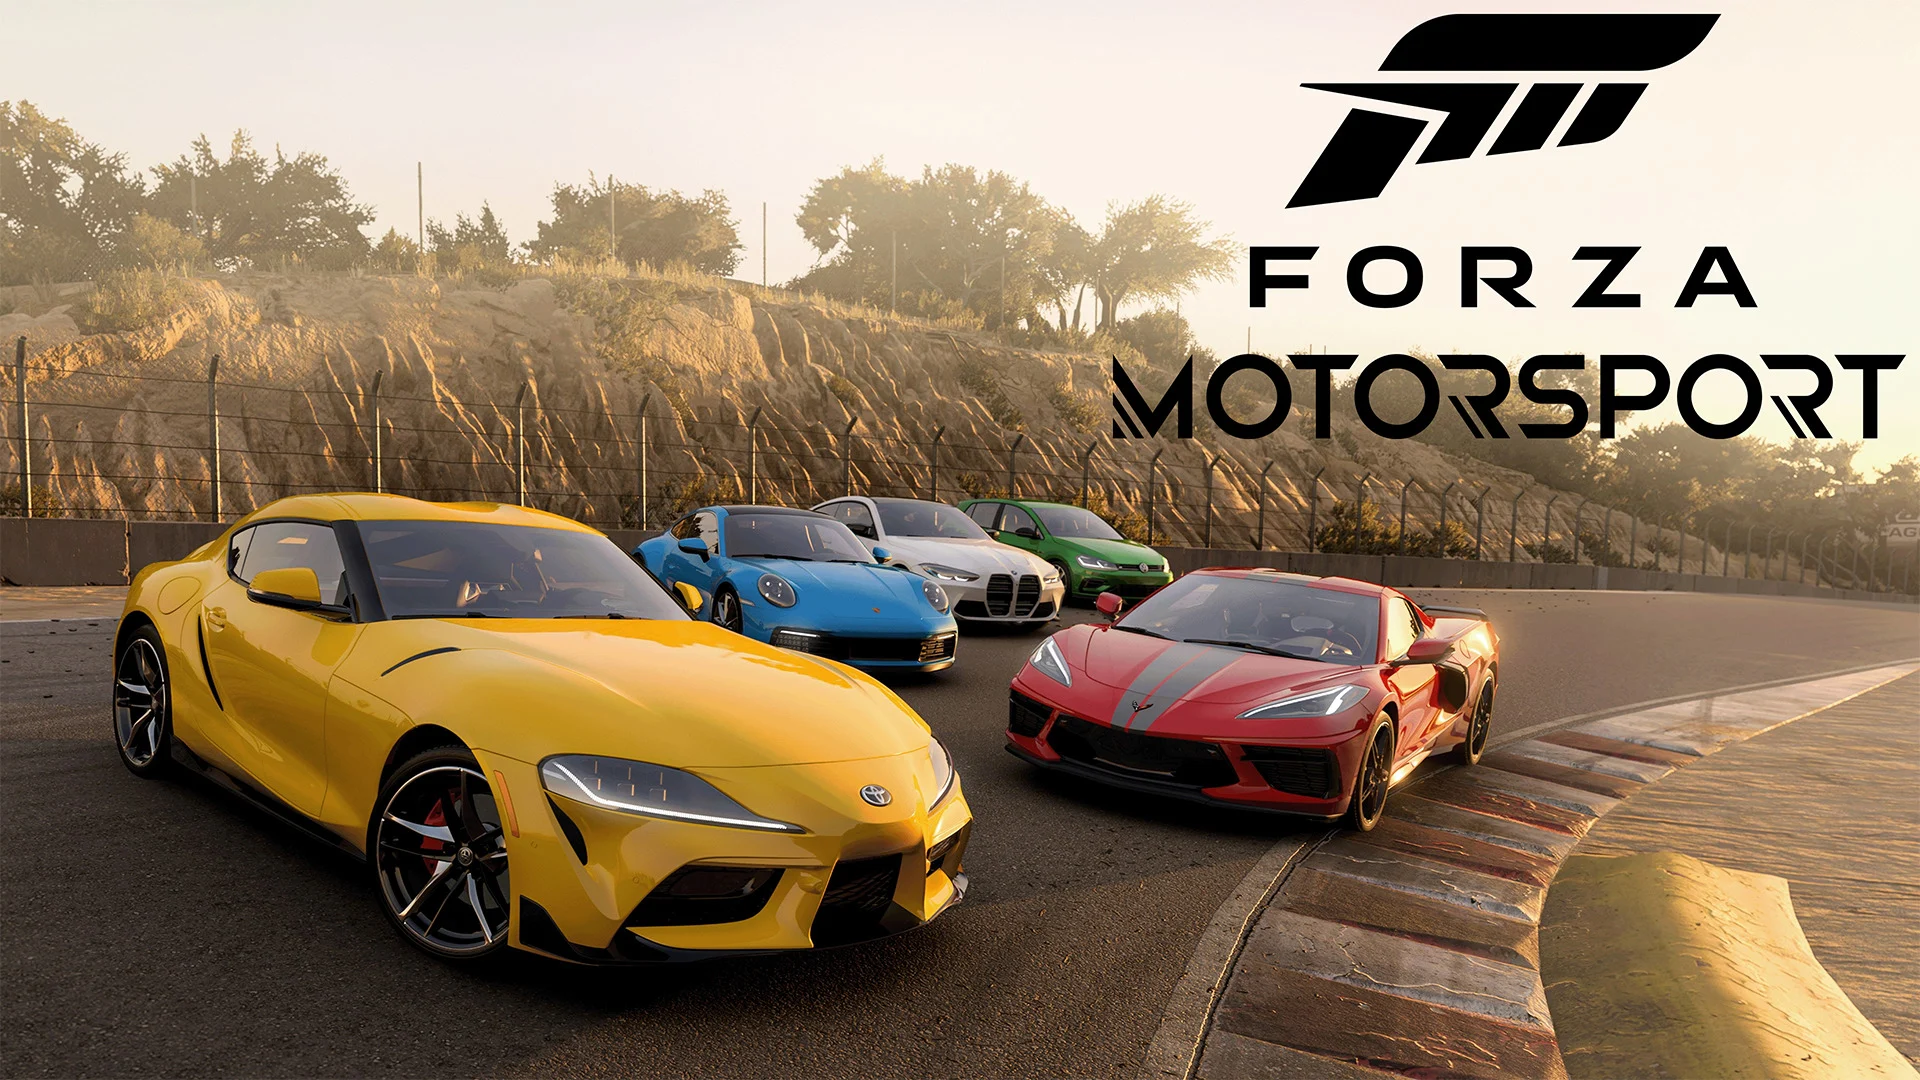 Turn 10 Studios talks about Update 10 for Forza Motorsport: Nordschleife track and a bunch of bug fixes and improvements